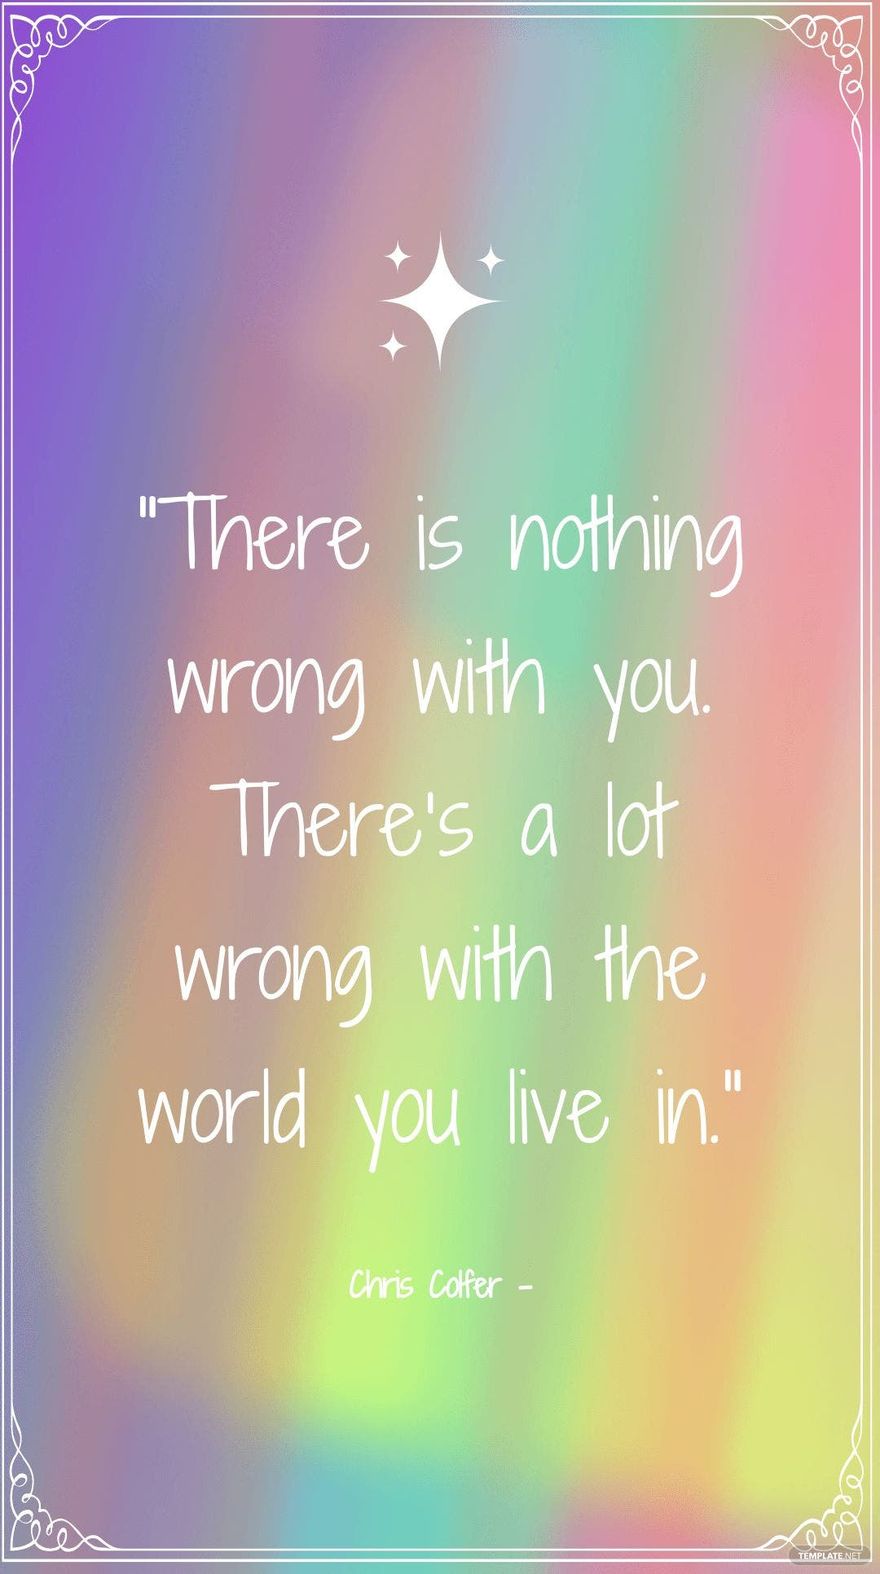 Chris Colfer - There is nothing wrong with you. There’s a lot wrong with the world you live in.